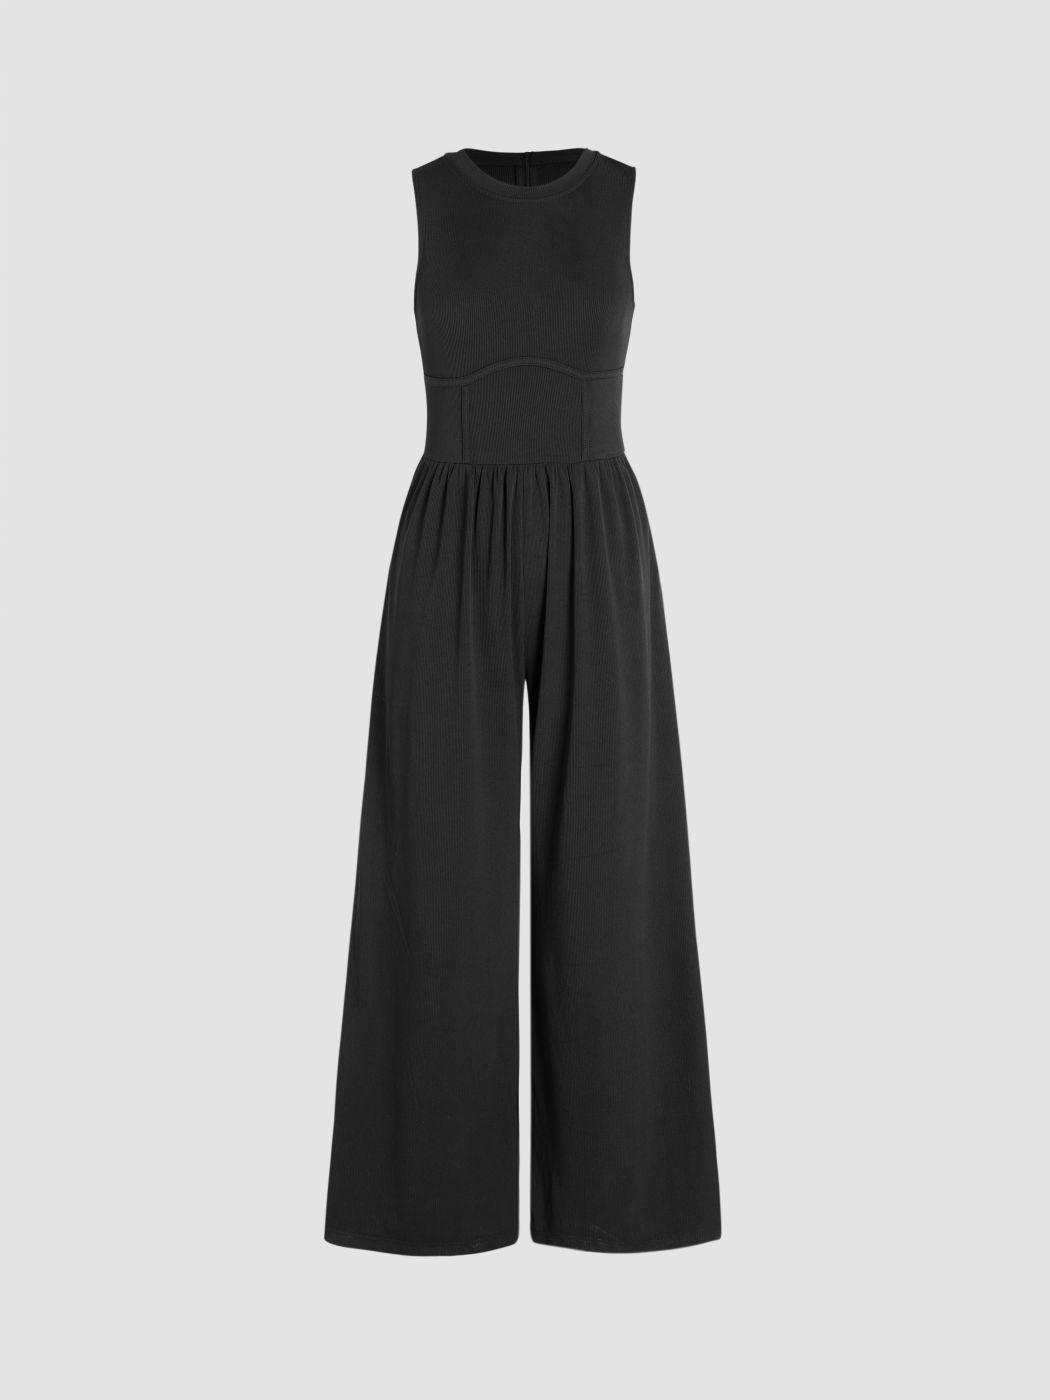 Solid Sleeveless Wide Leg Jumpsuit For Daily Casual Work